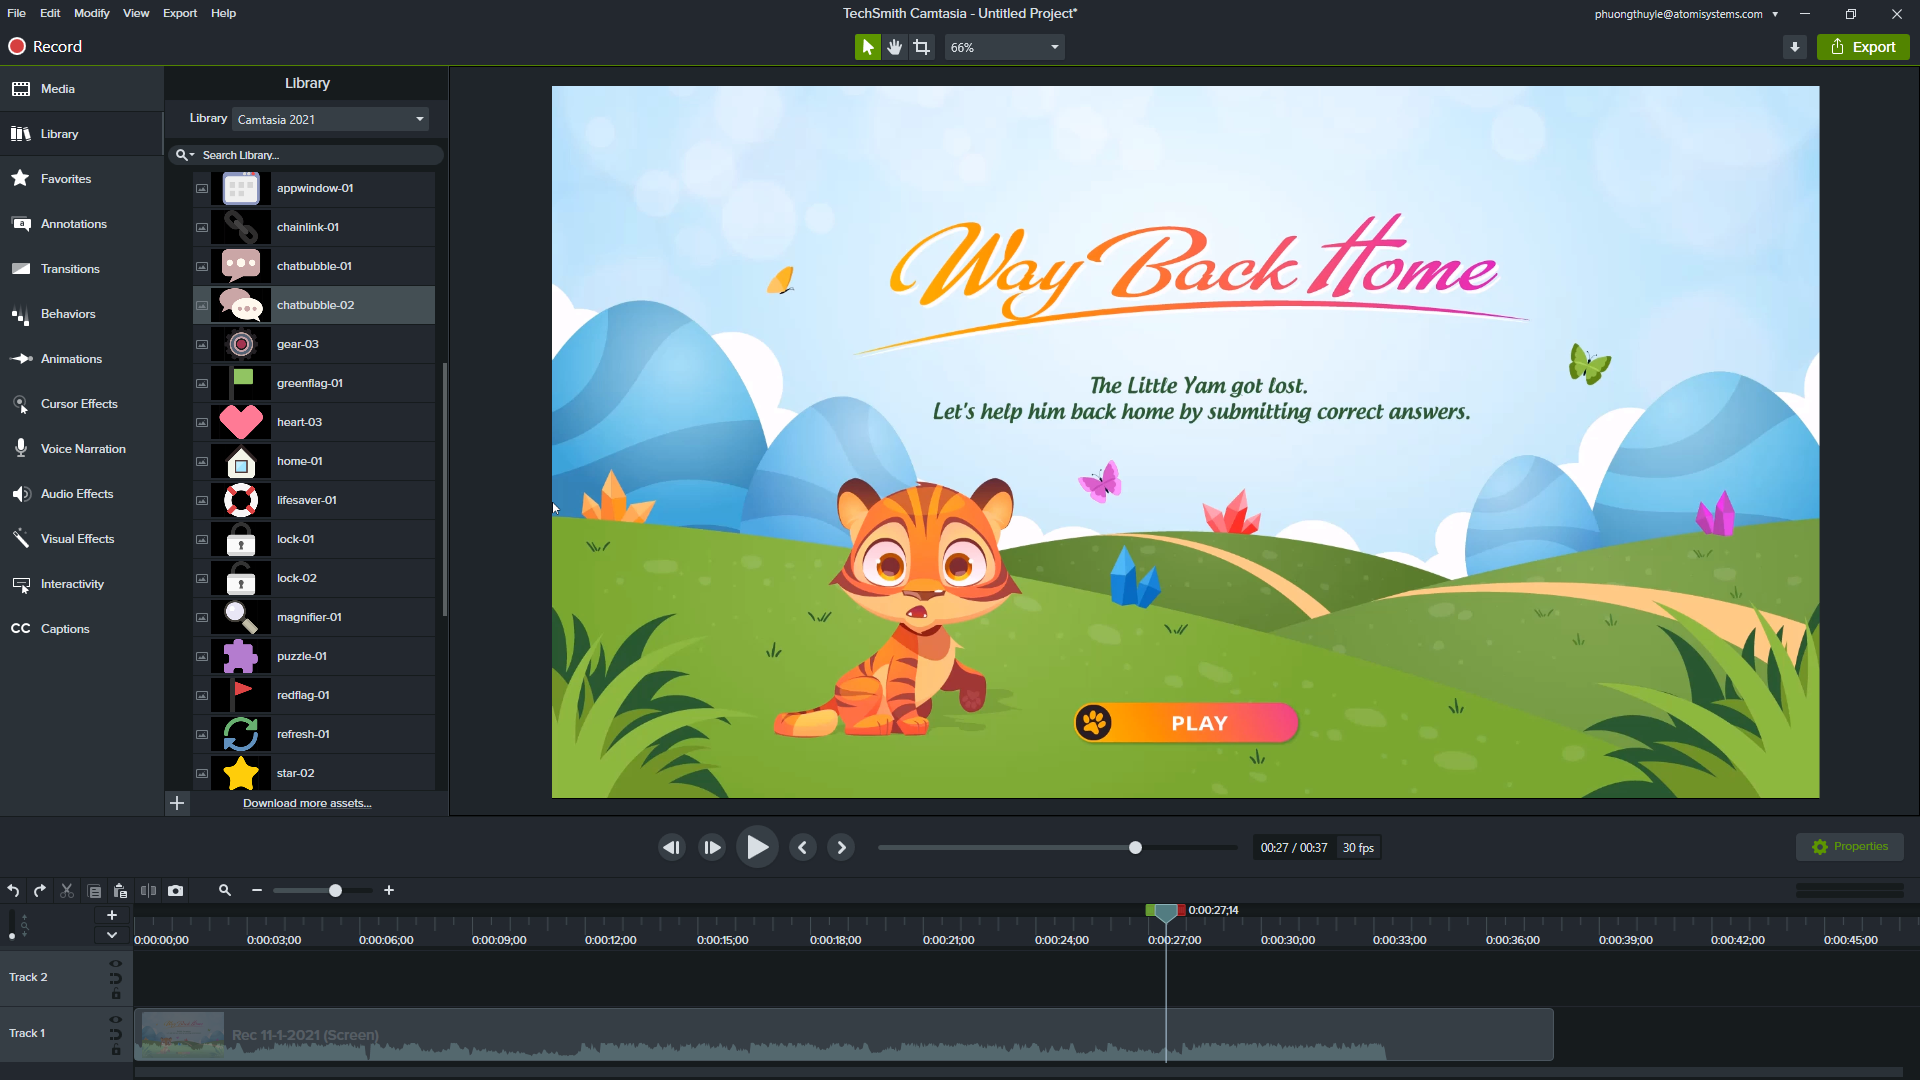 Free Cam — Free Screen Recording & Video Editing Software